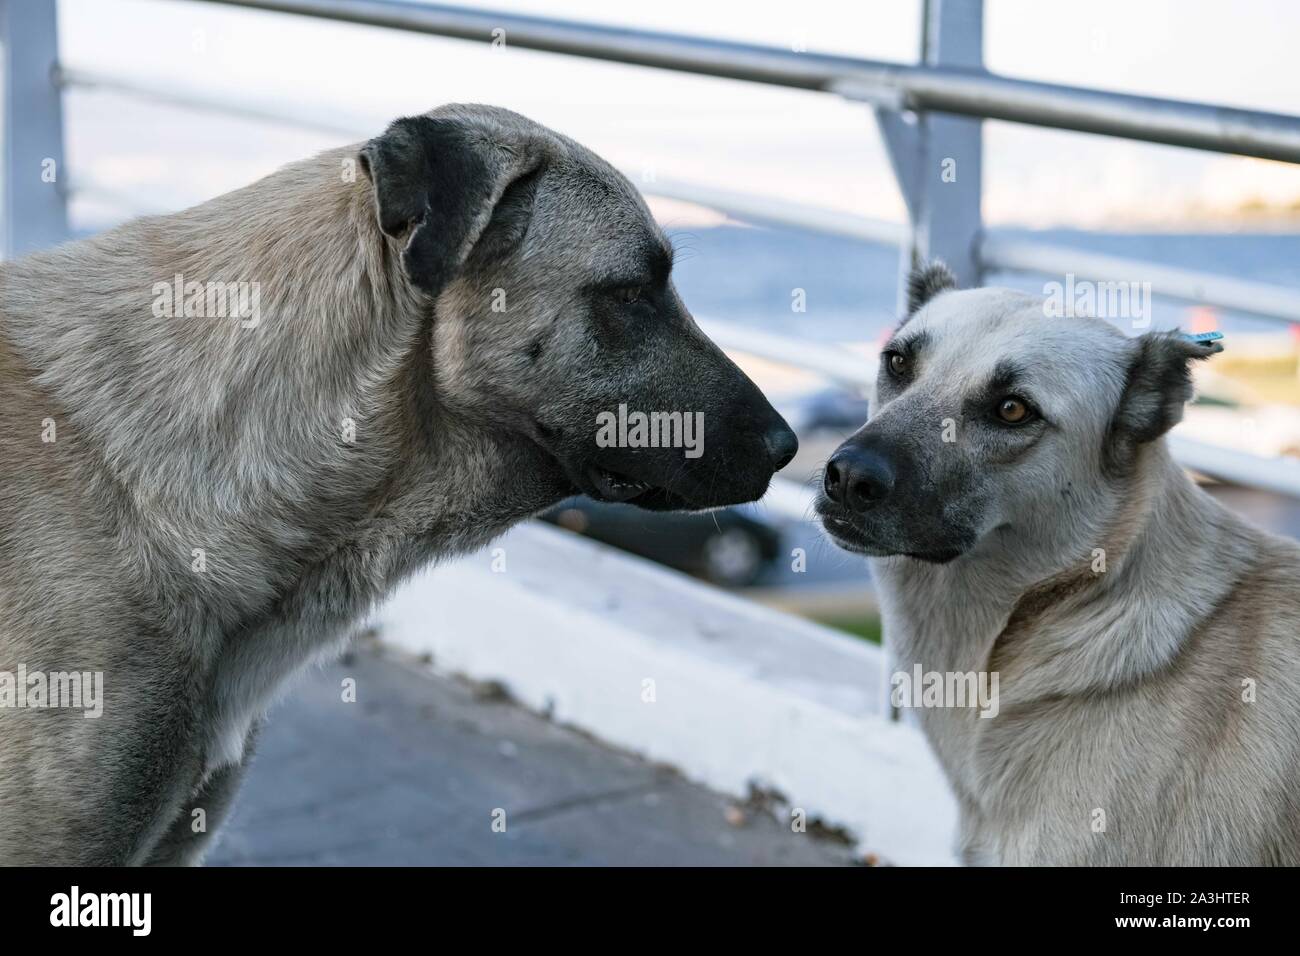 Two cute urban dogs, getting to know and greeting each other by sniffing in the middle of the street in Izmir, Turkey. Stock Photo